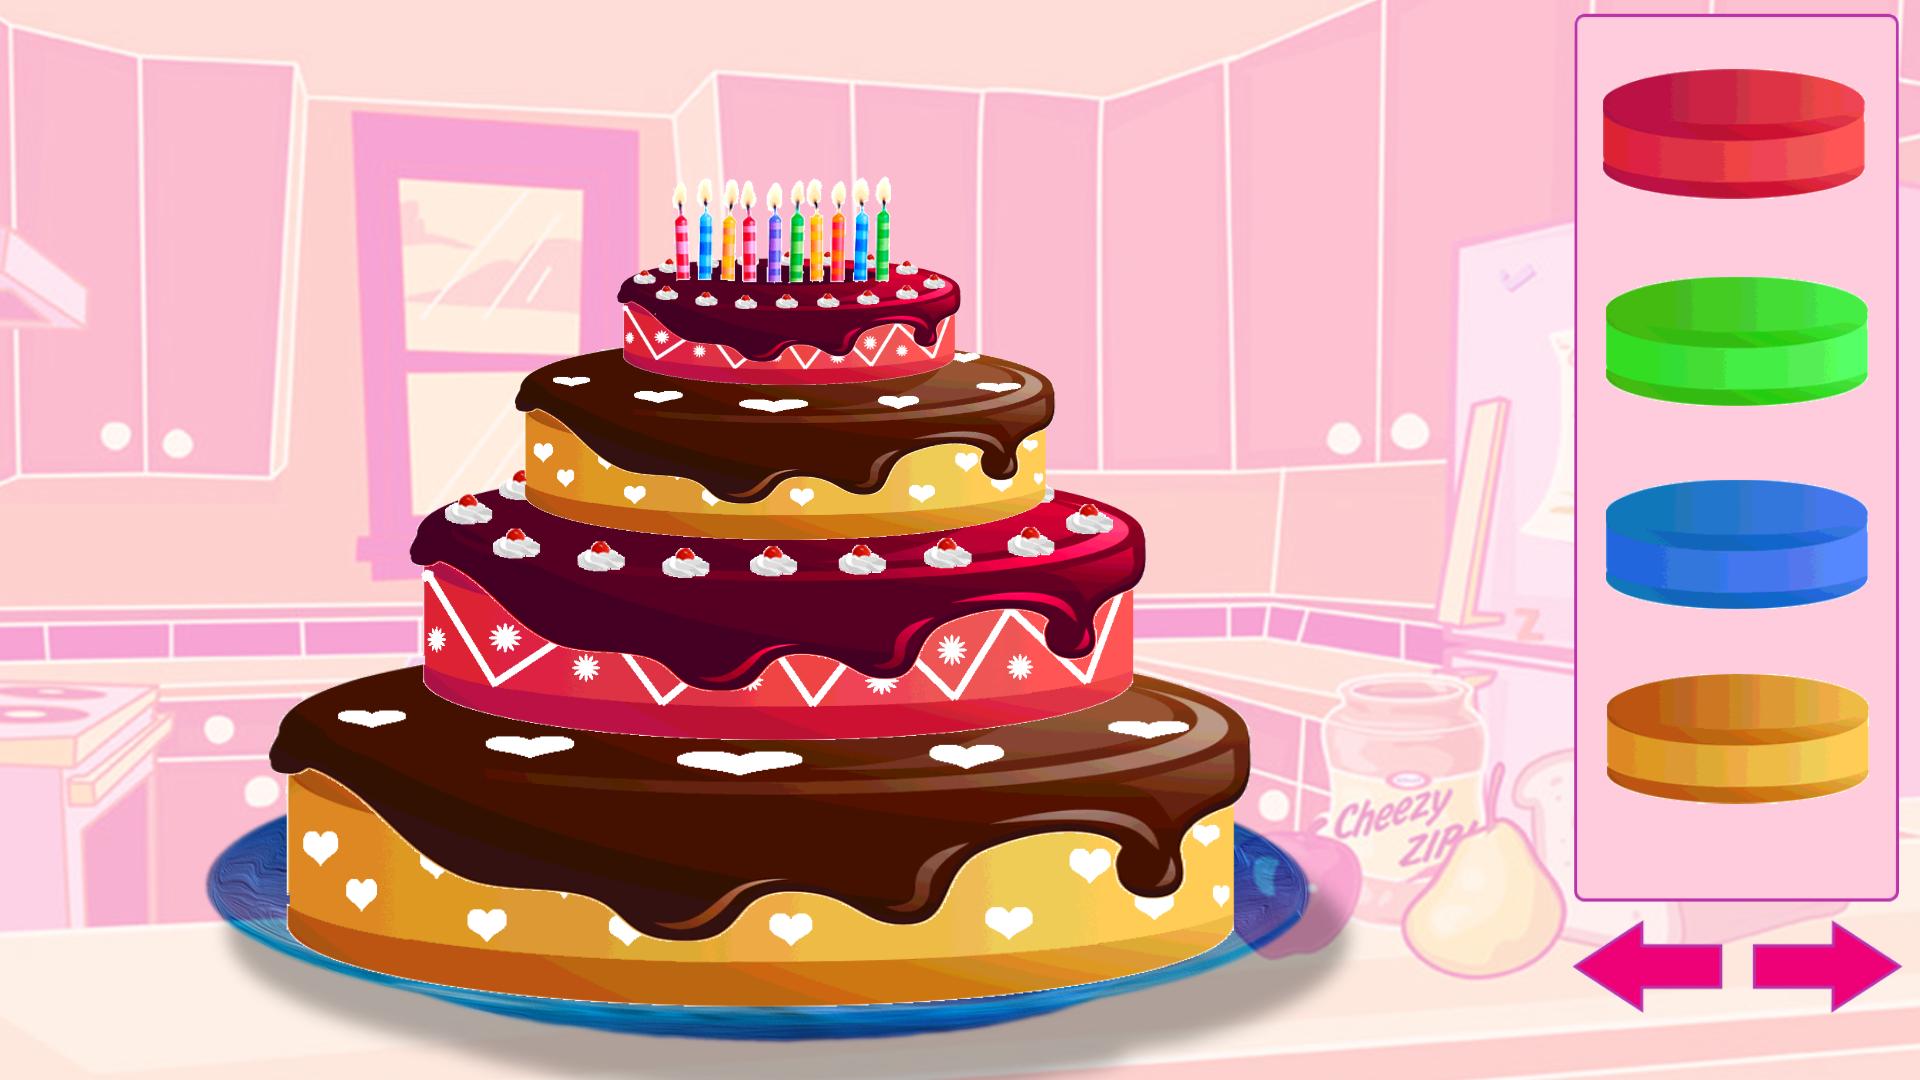 Make Happy Birthday Cake Girls Games For Android Apk Download - gamer girl roblox cake